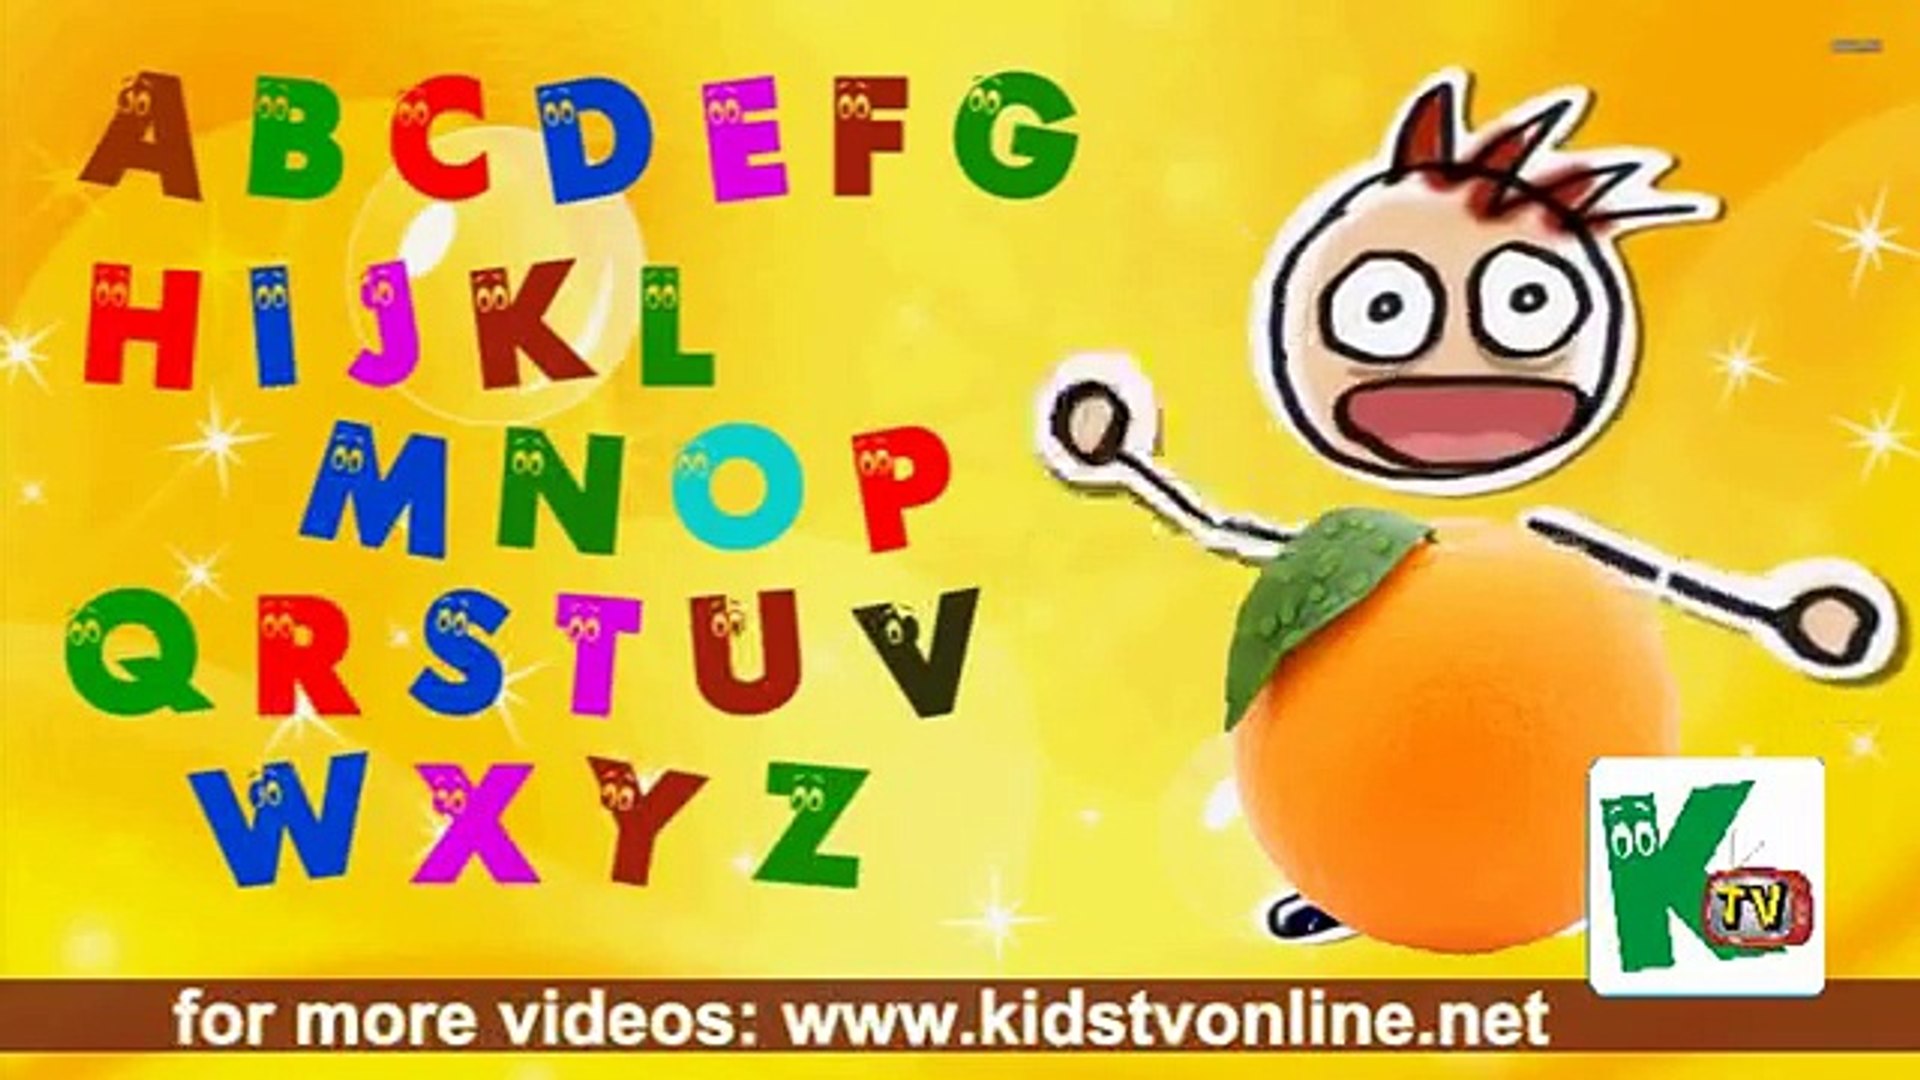 Basic English learning with ABC Song